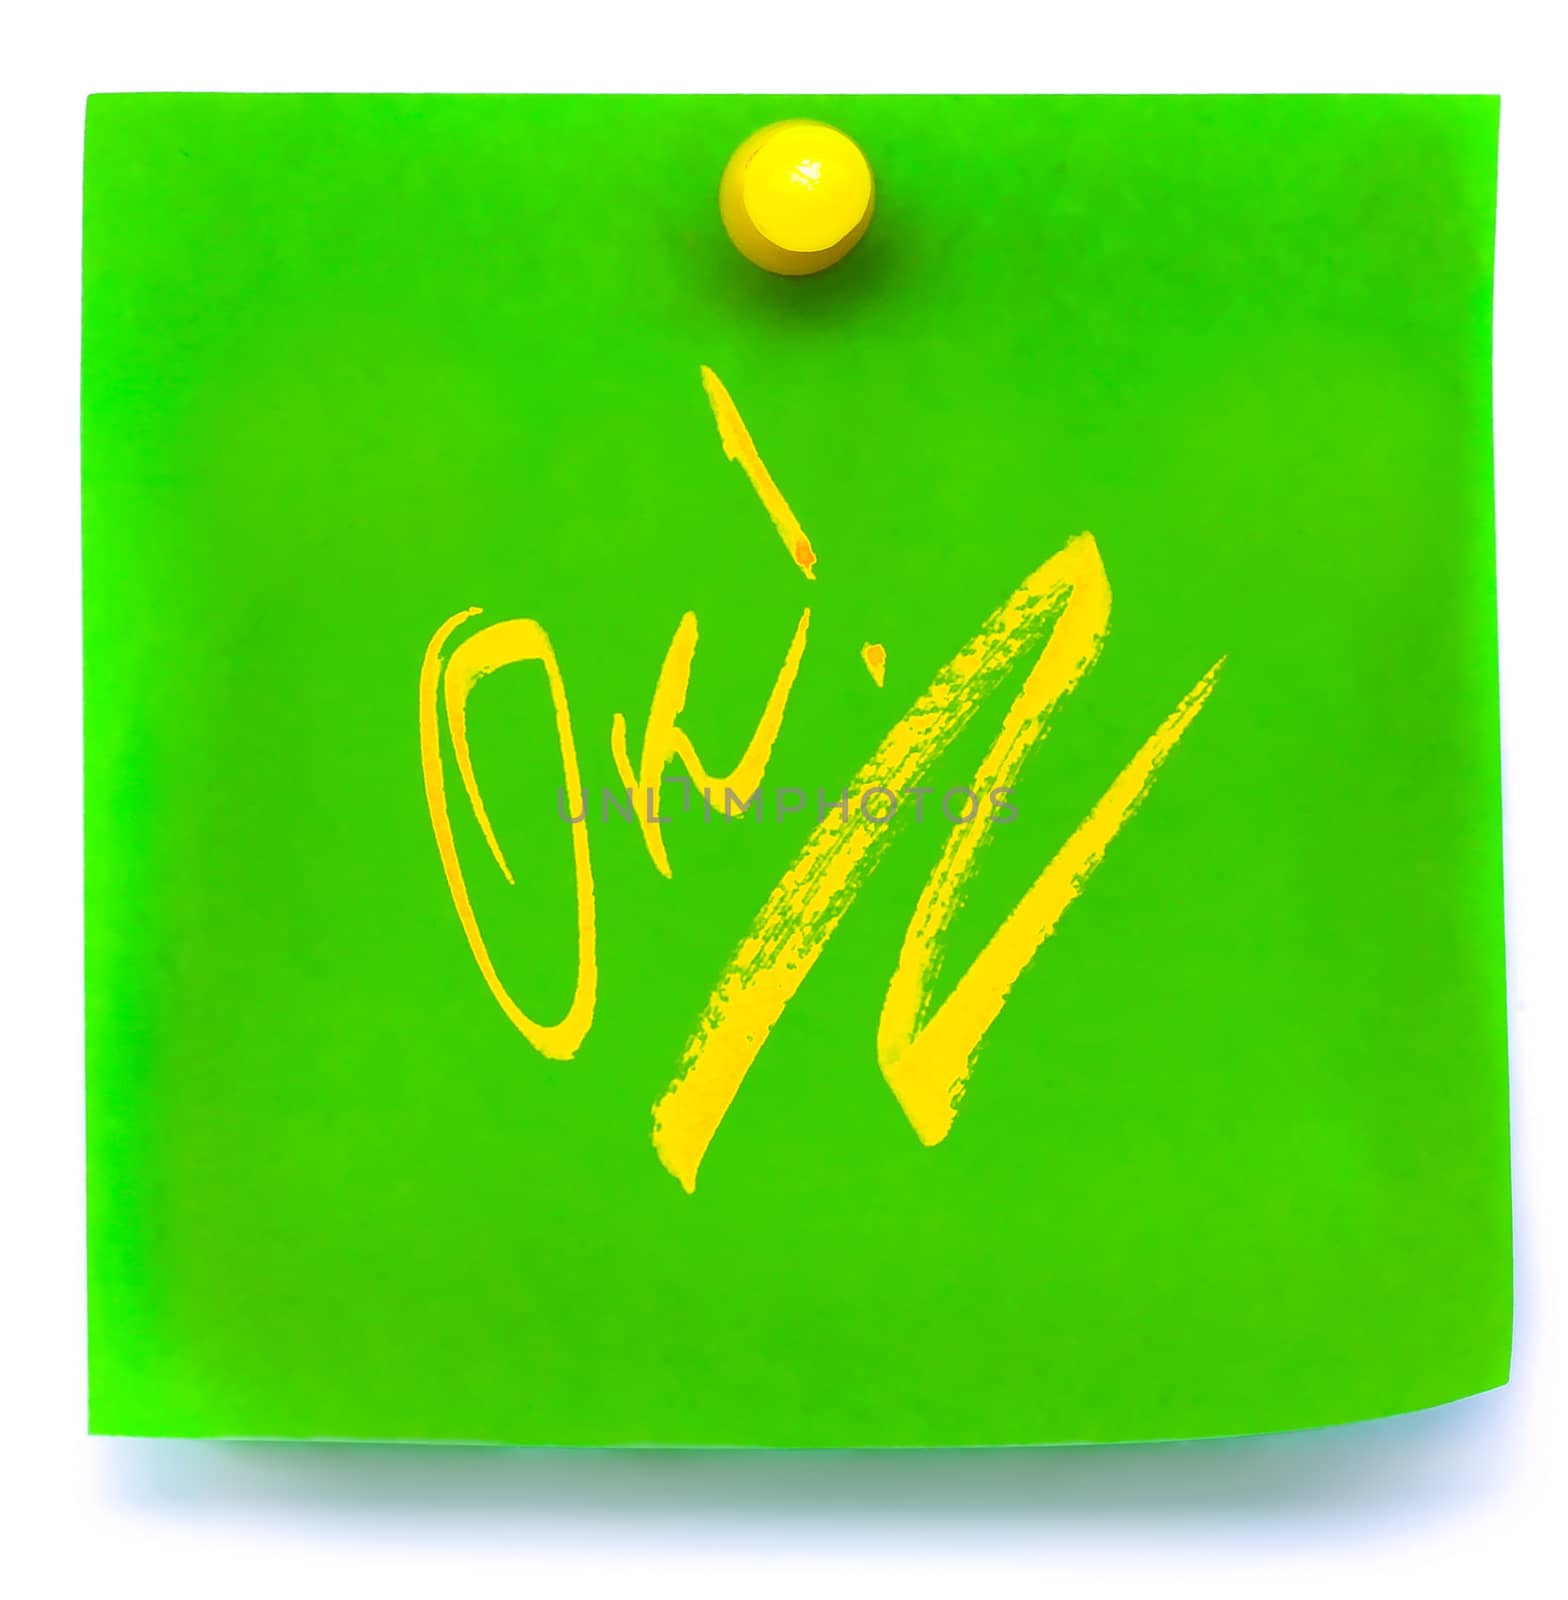 Green Sticker with yellow ok on a White Background by Romas_ph